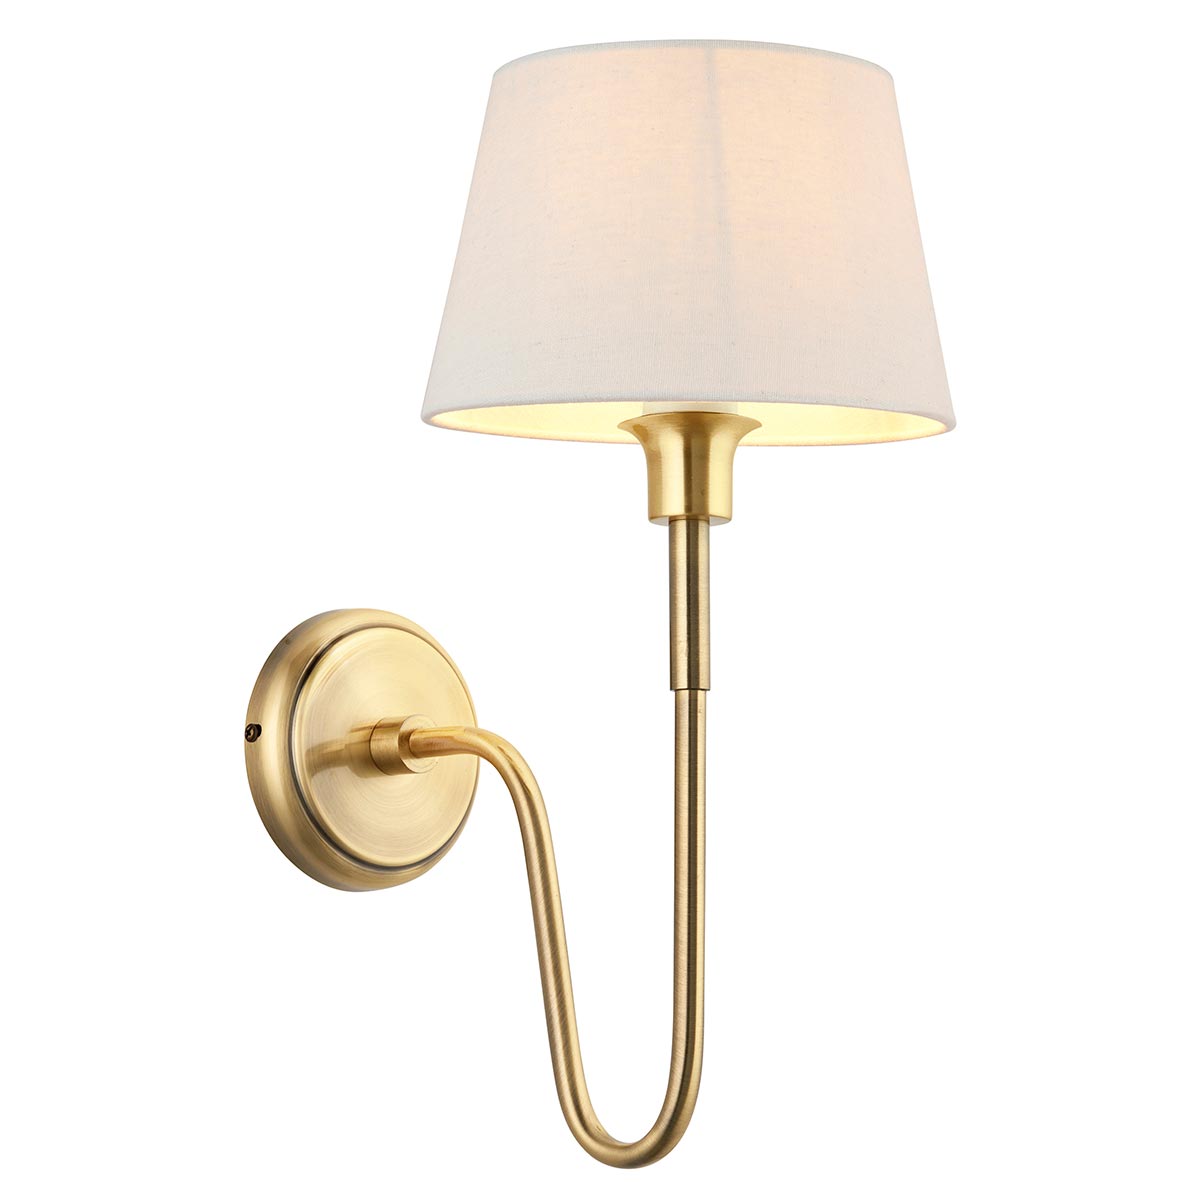 Endon Rouen Antique Brass Wall Light With Ivory Shade